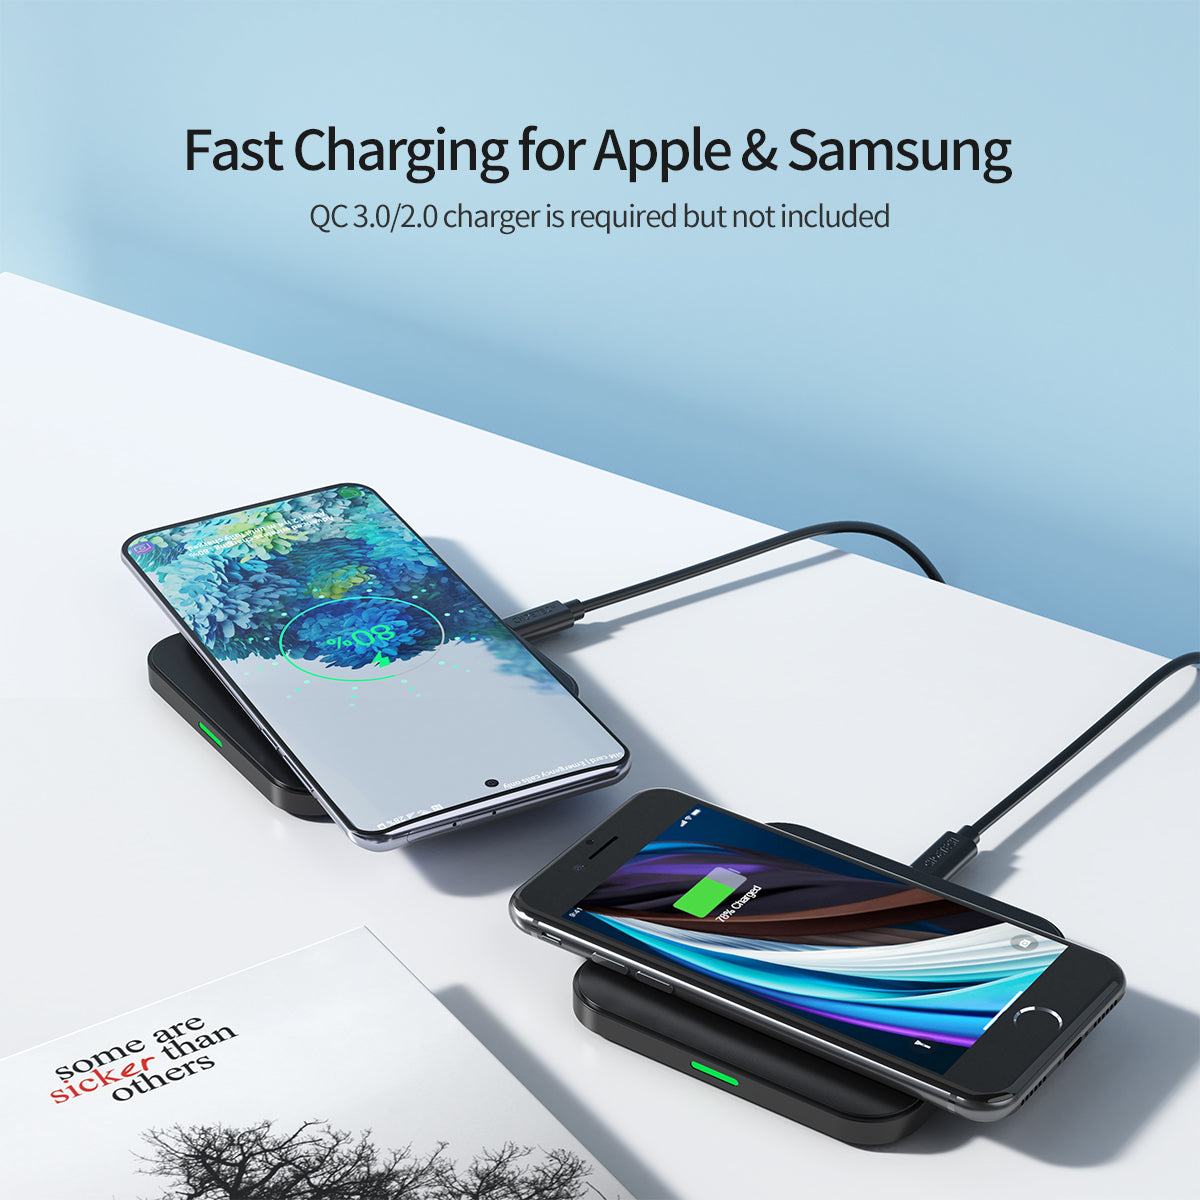 MIX00097 [2 Pack] Wireless Charger, Qi-Certified 10W Max Fast Wireless Charging Pad Compatible with iPhone 12/12 Mini/12 Pro Max/SE 2020/11 Pro Max,Samsung Galaxy S21/S20,AirPods Pro(No AC Adapter)